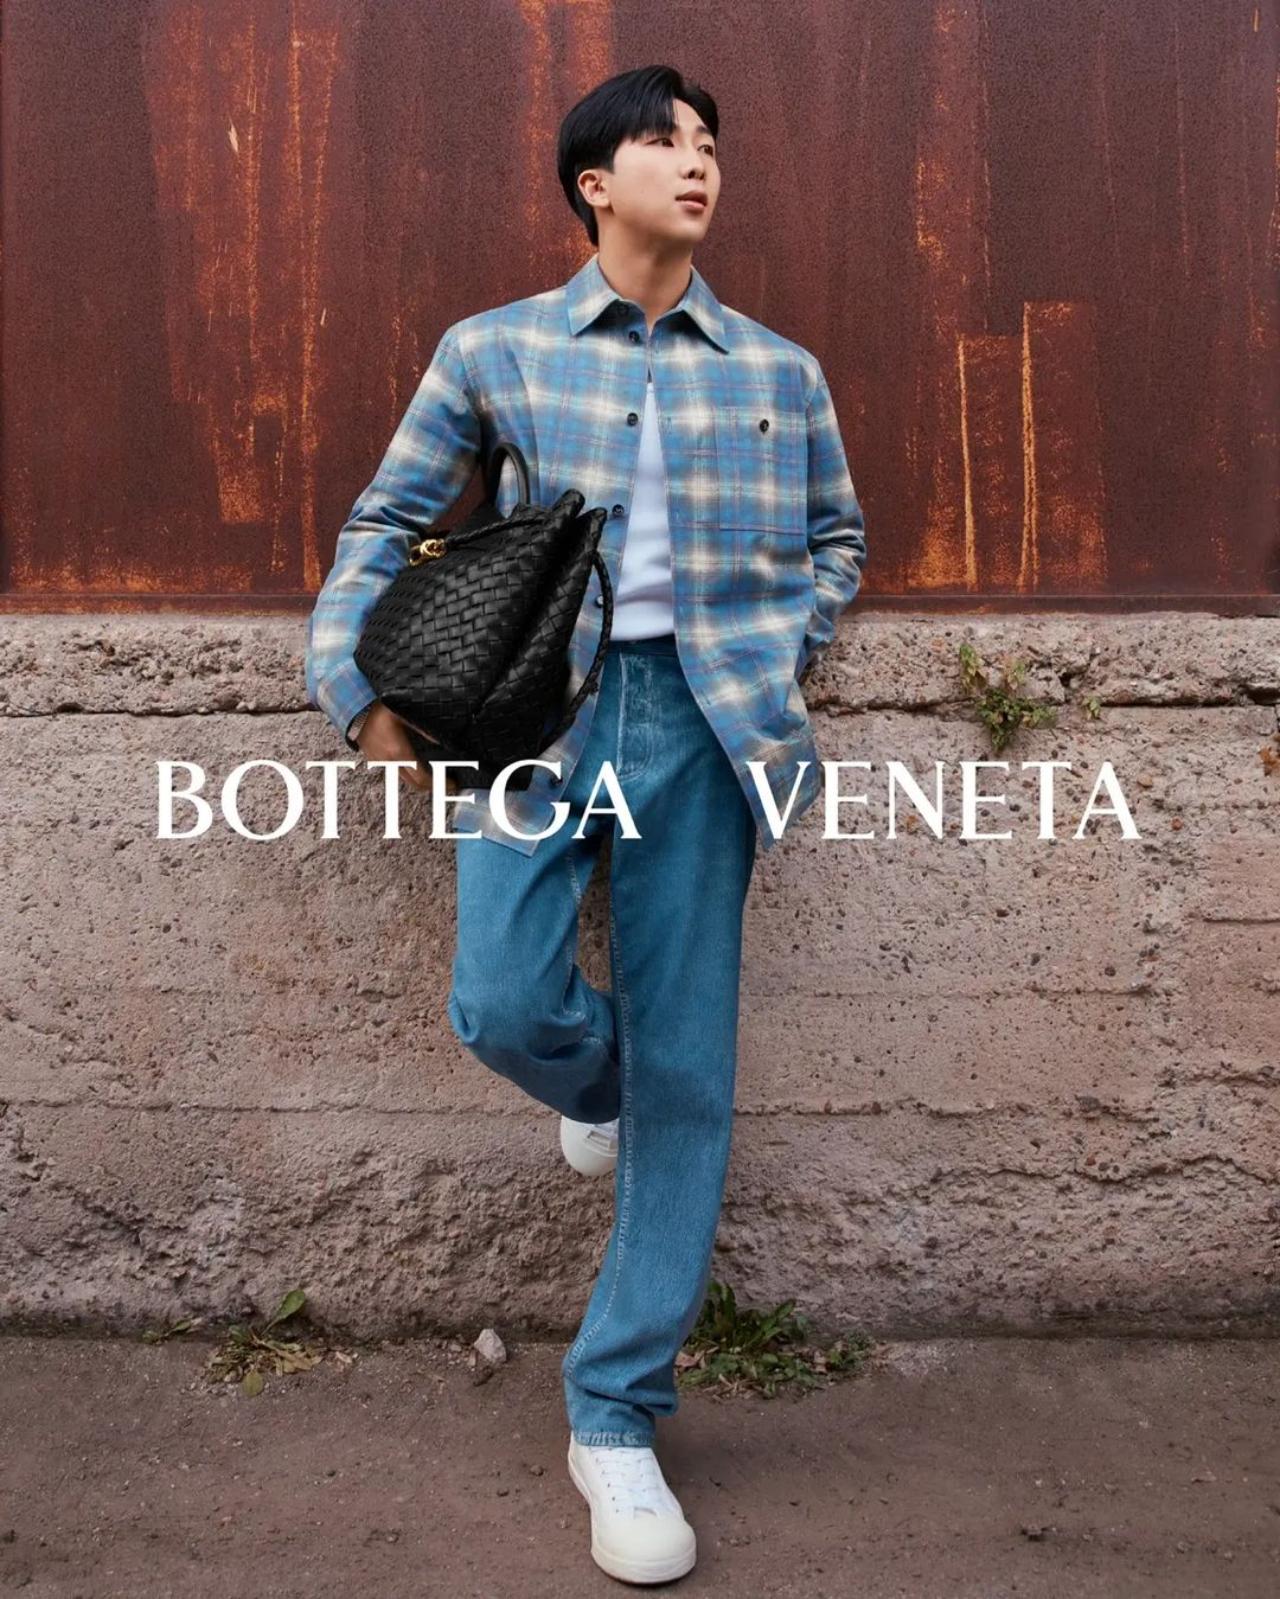 BTS's RM joined the Bottega Veneta family, a fashion brand known for its understated yet subtlely royal lines of clothing. He was the face of Bottega Veneta’s spring/summer 2023 campaign and also wore their outfit during a performance for his solo album, 'Indigo' at the Dia Beacon art museum in New York City. Can you tell this classy outfit is in fact, made of leather? 